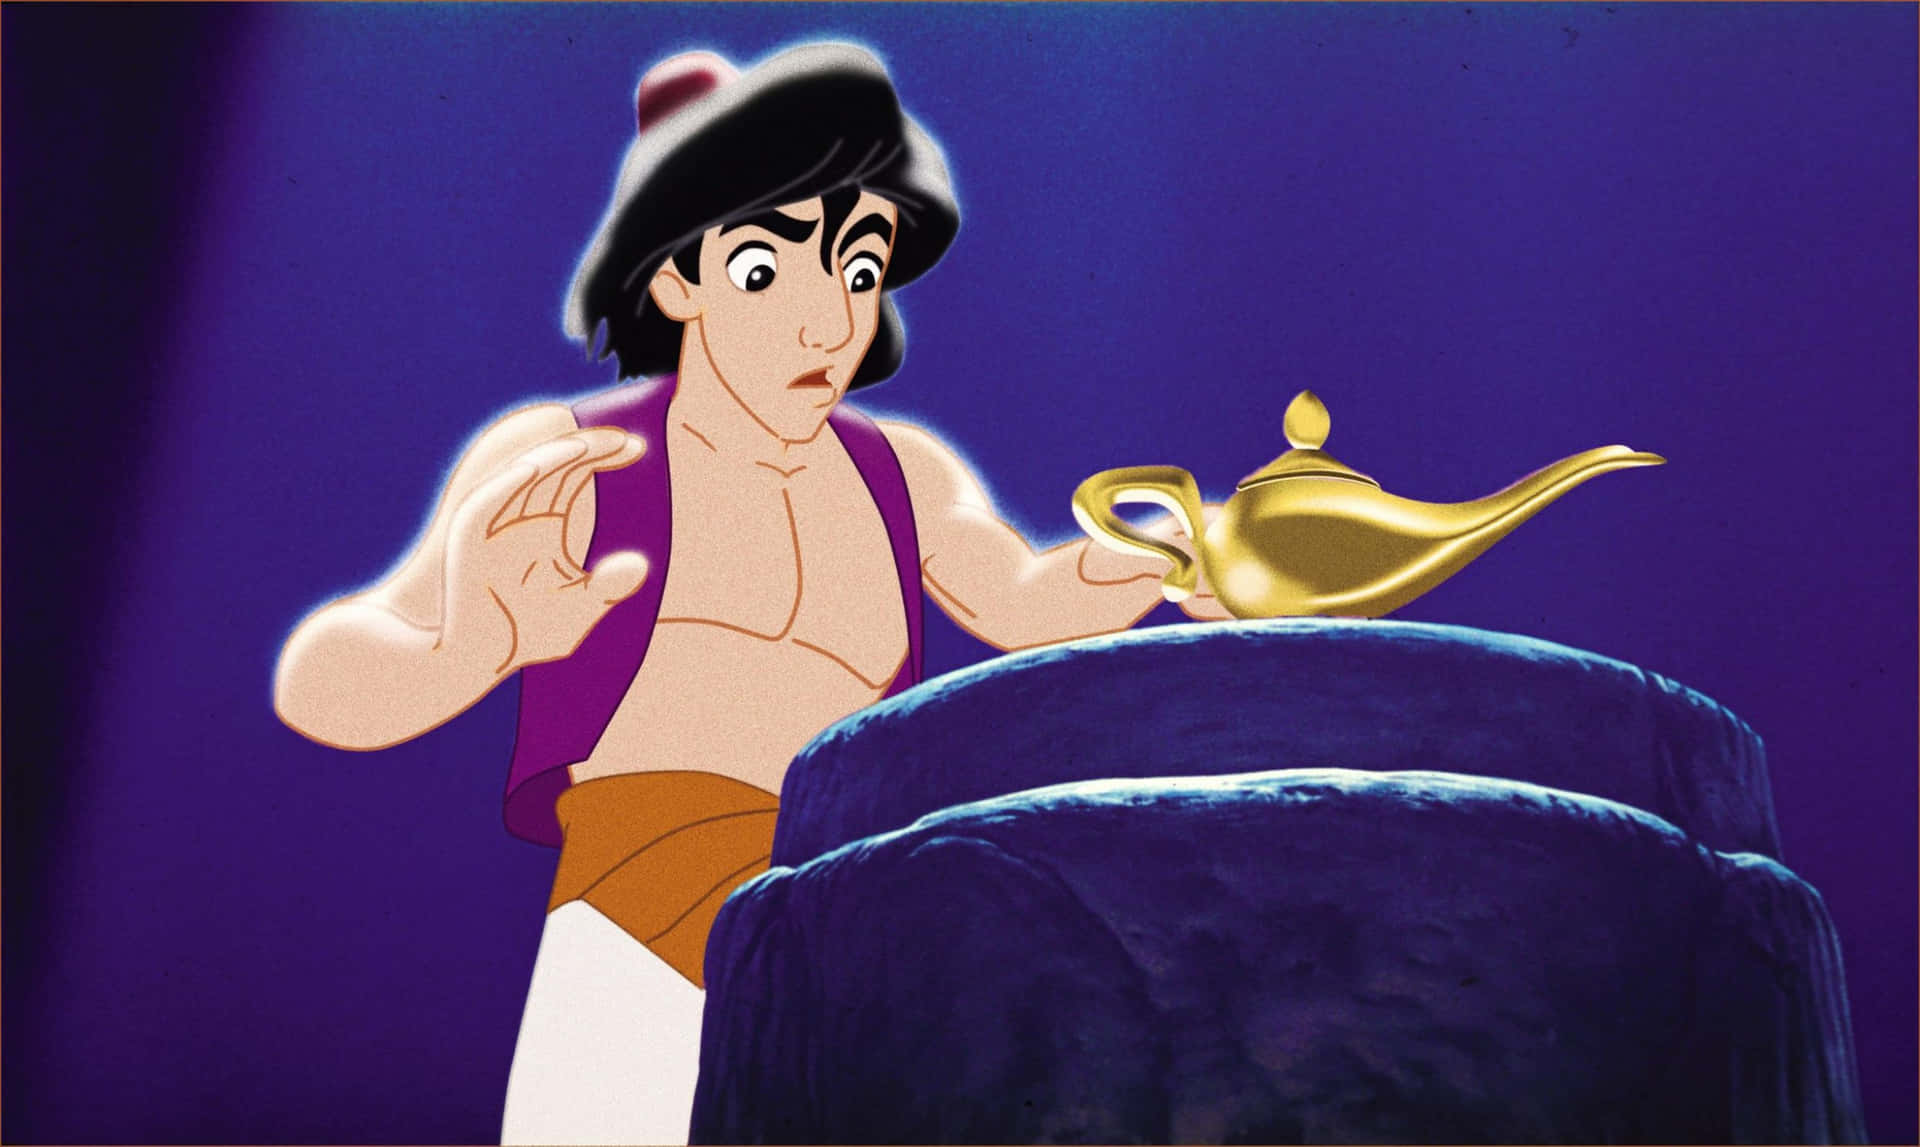 "Journey Into Adventure! Join Aladdin and his friends as they explore the exciting world of Agrabah!"